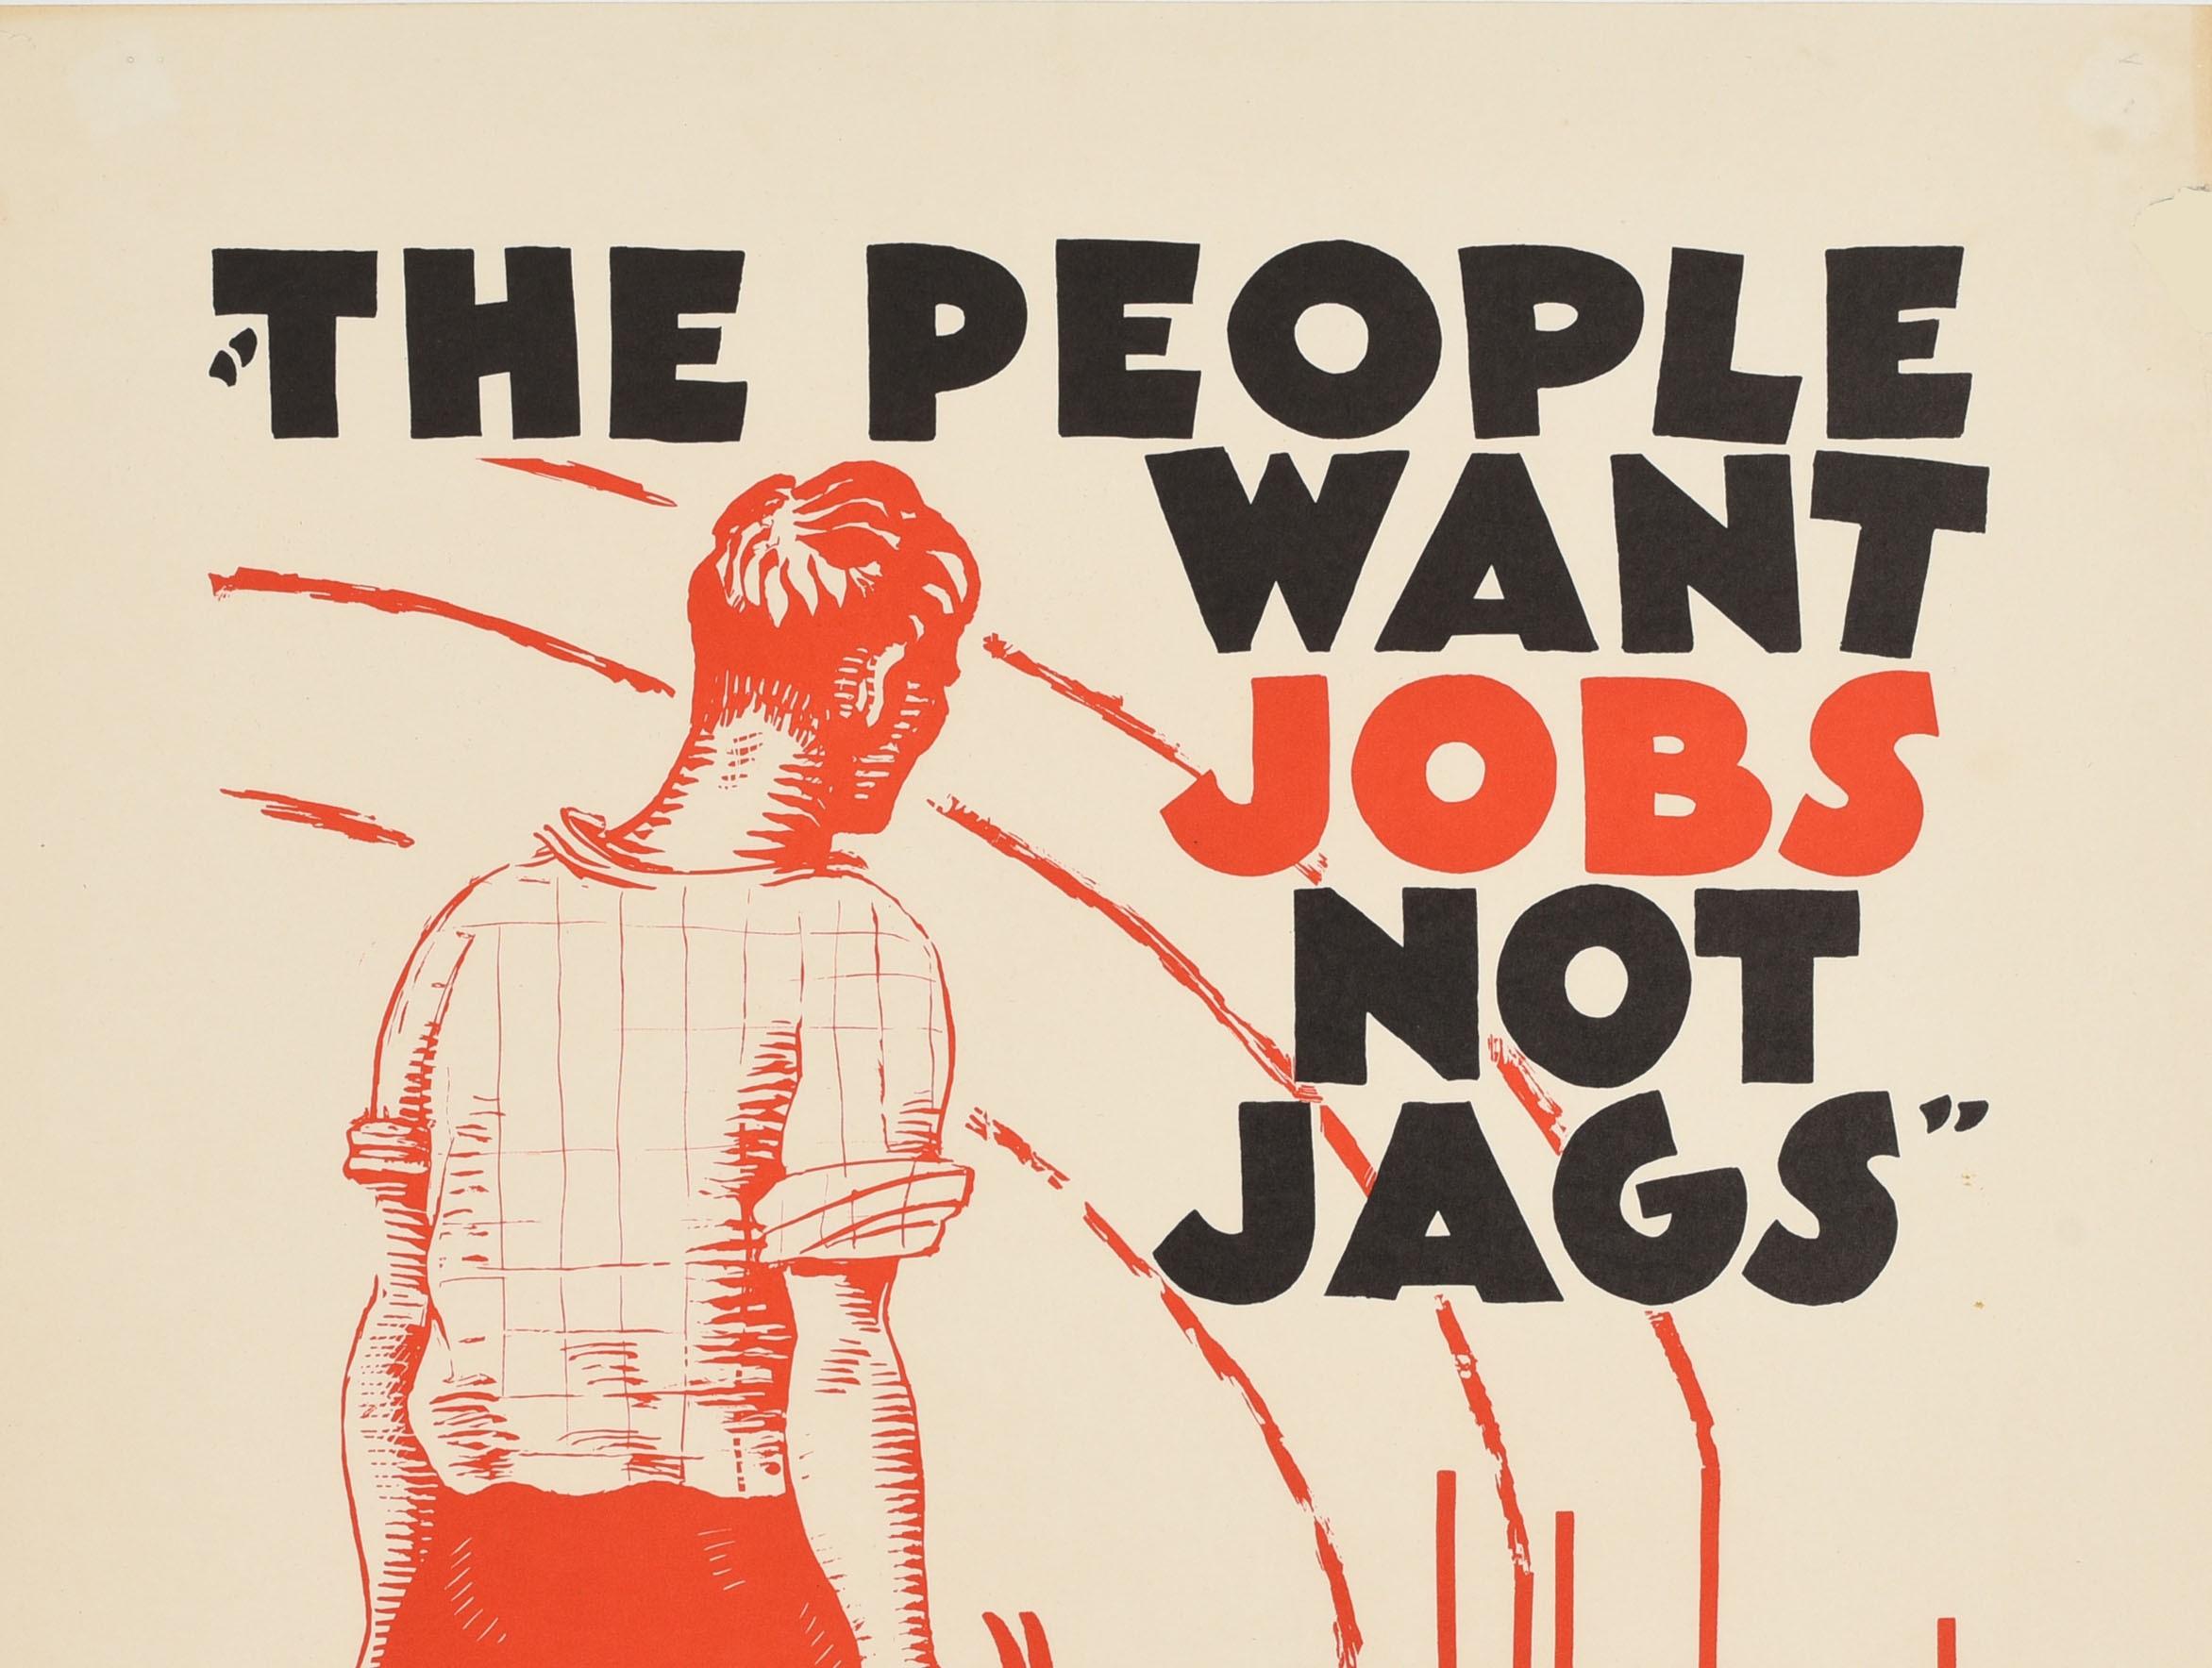 Original Vintage Poster The People Want Jobs Not Jags Drink Alcohol Prohibition - Print by Unknown